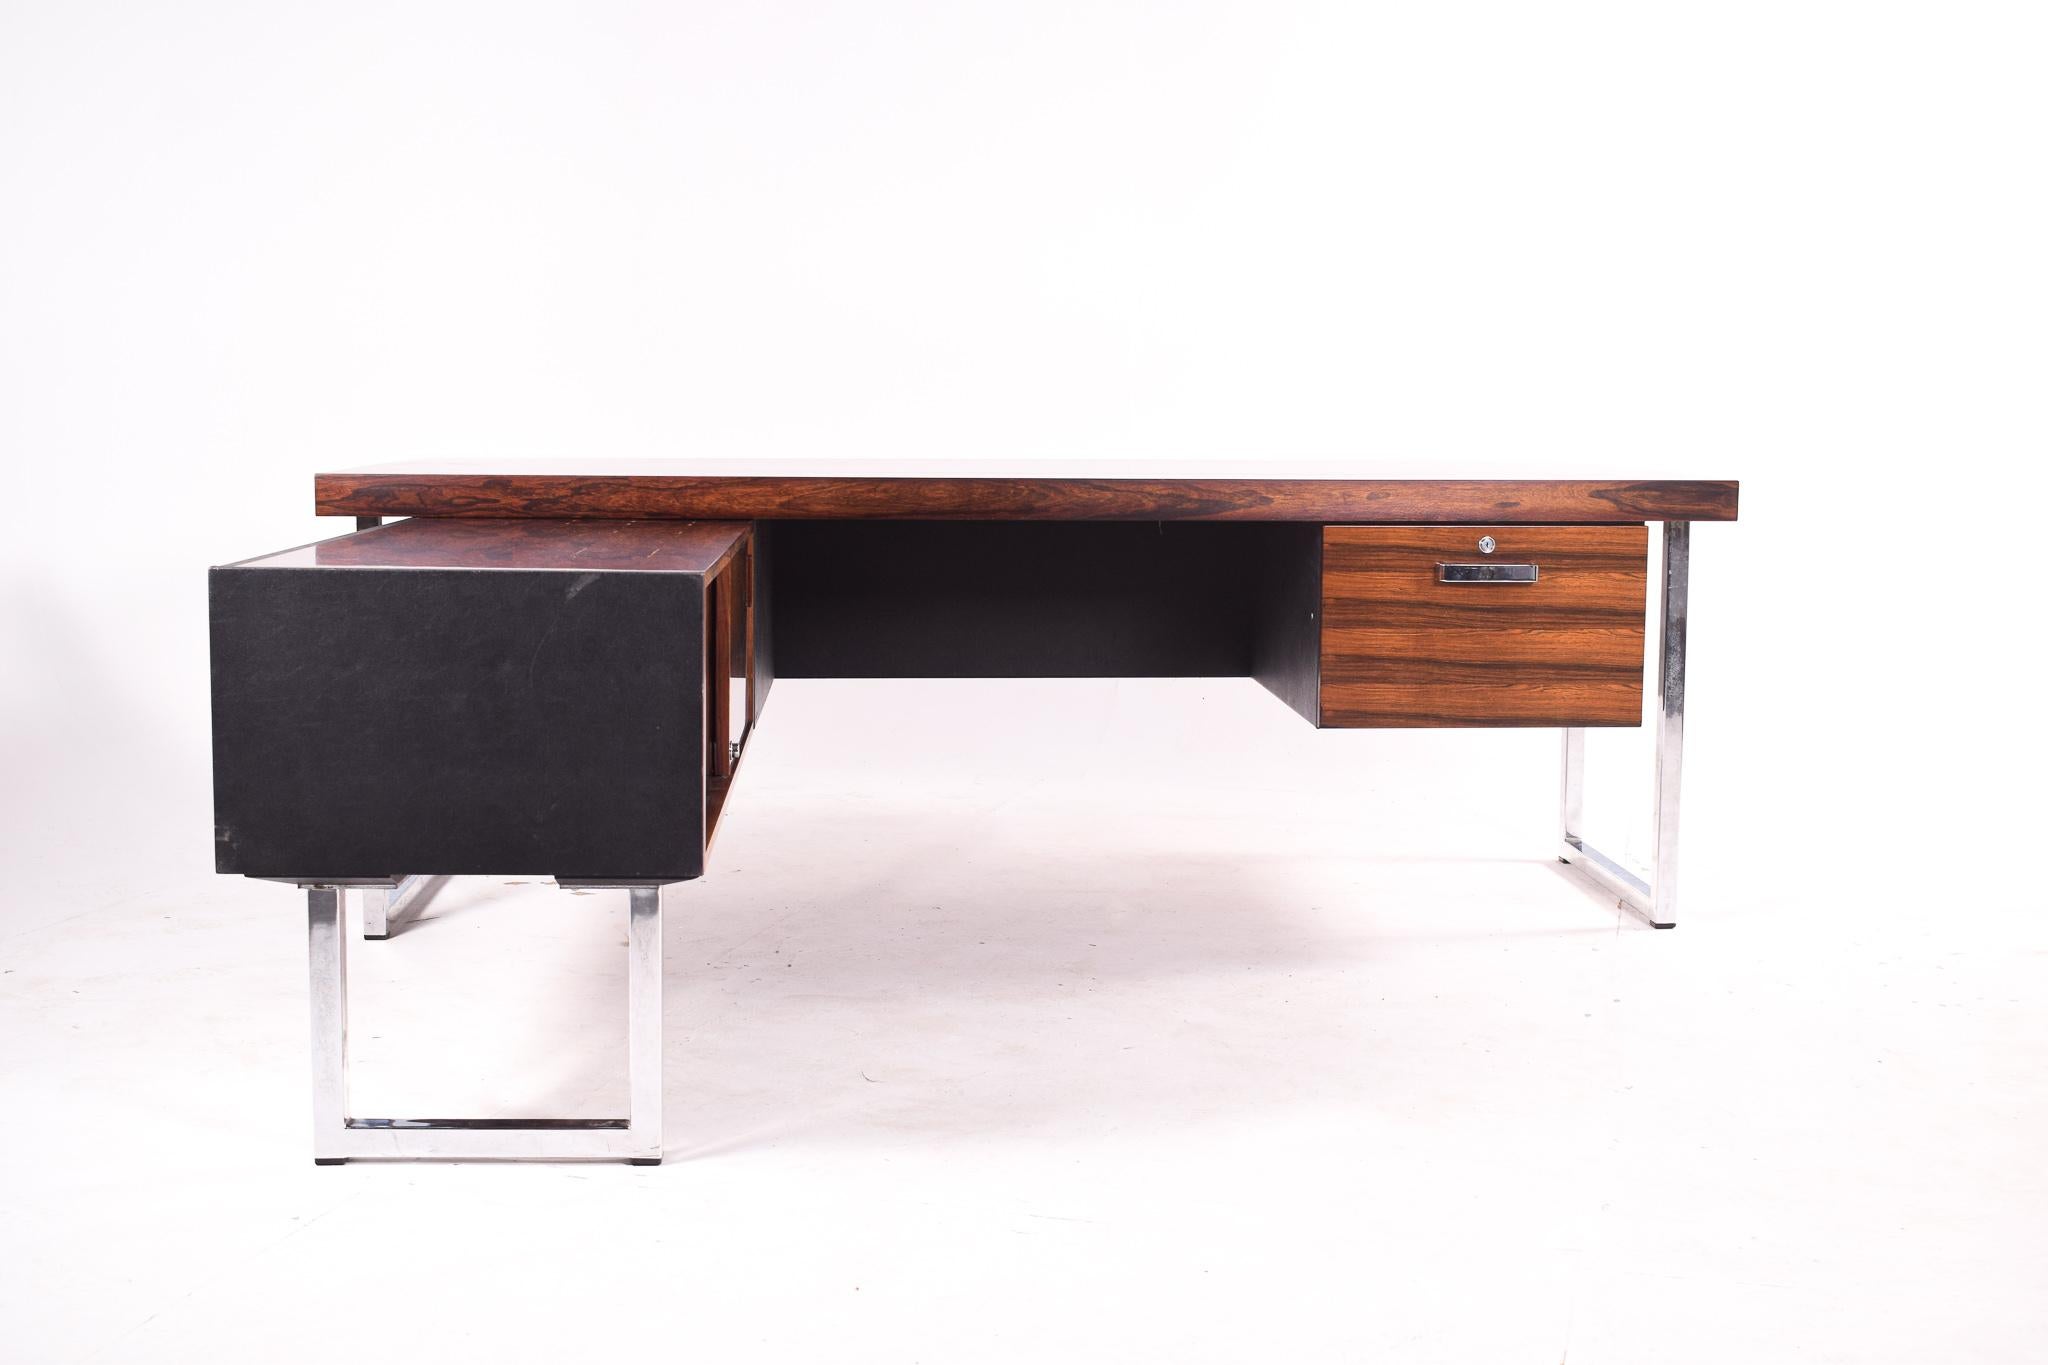 L-shaped desk designed by Gordon Russell for Gordon Russell ltd. The desk is completely original and restored. With two parts (sideboard and desk). The side of the sideboard has two slide doors. Made of rosewood veneer. Legs and handles in metal. An